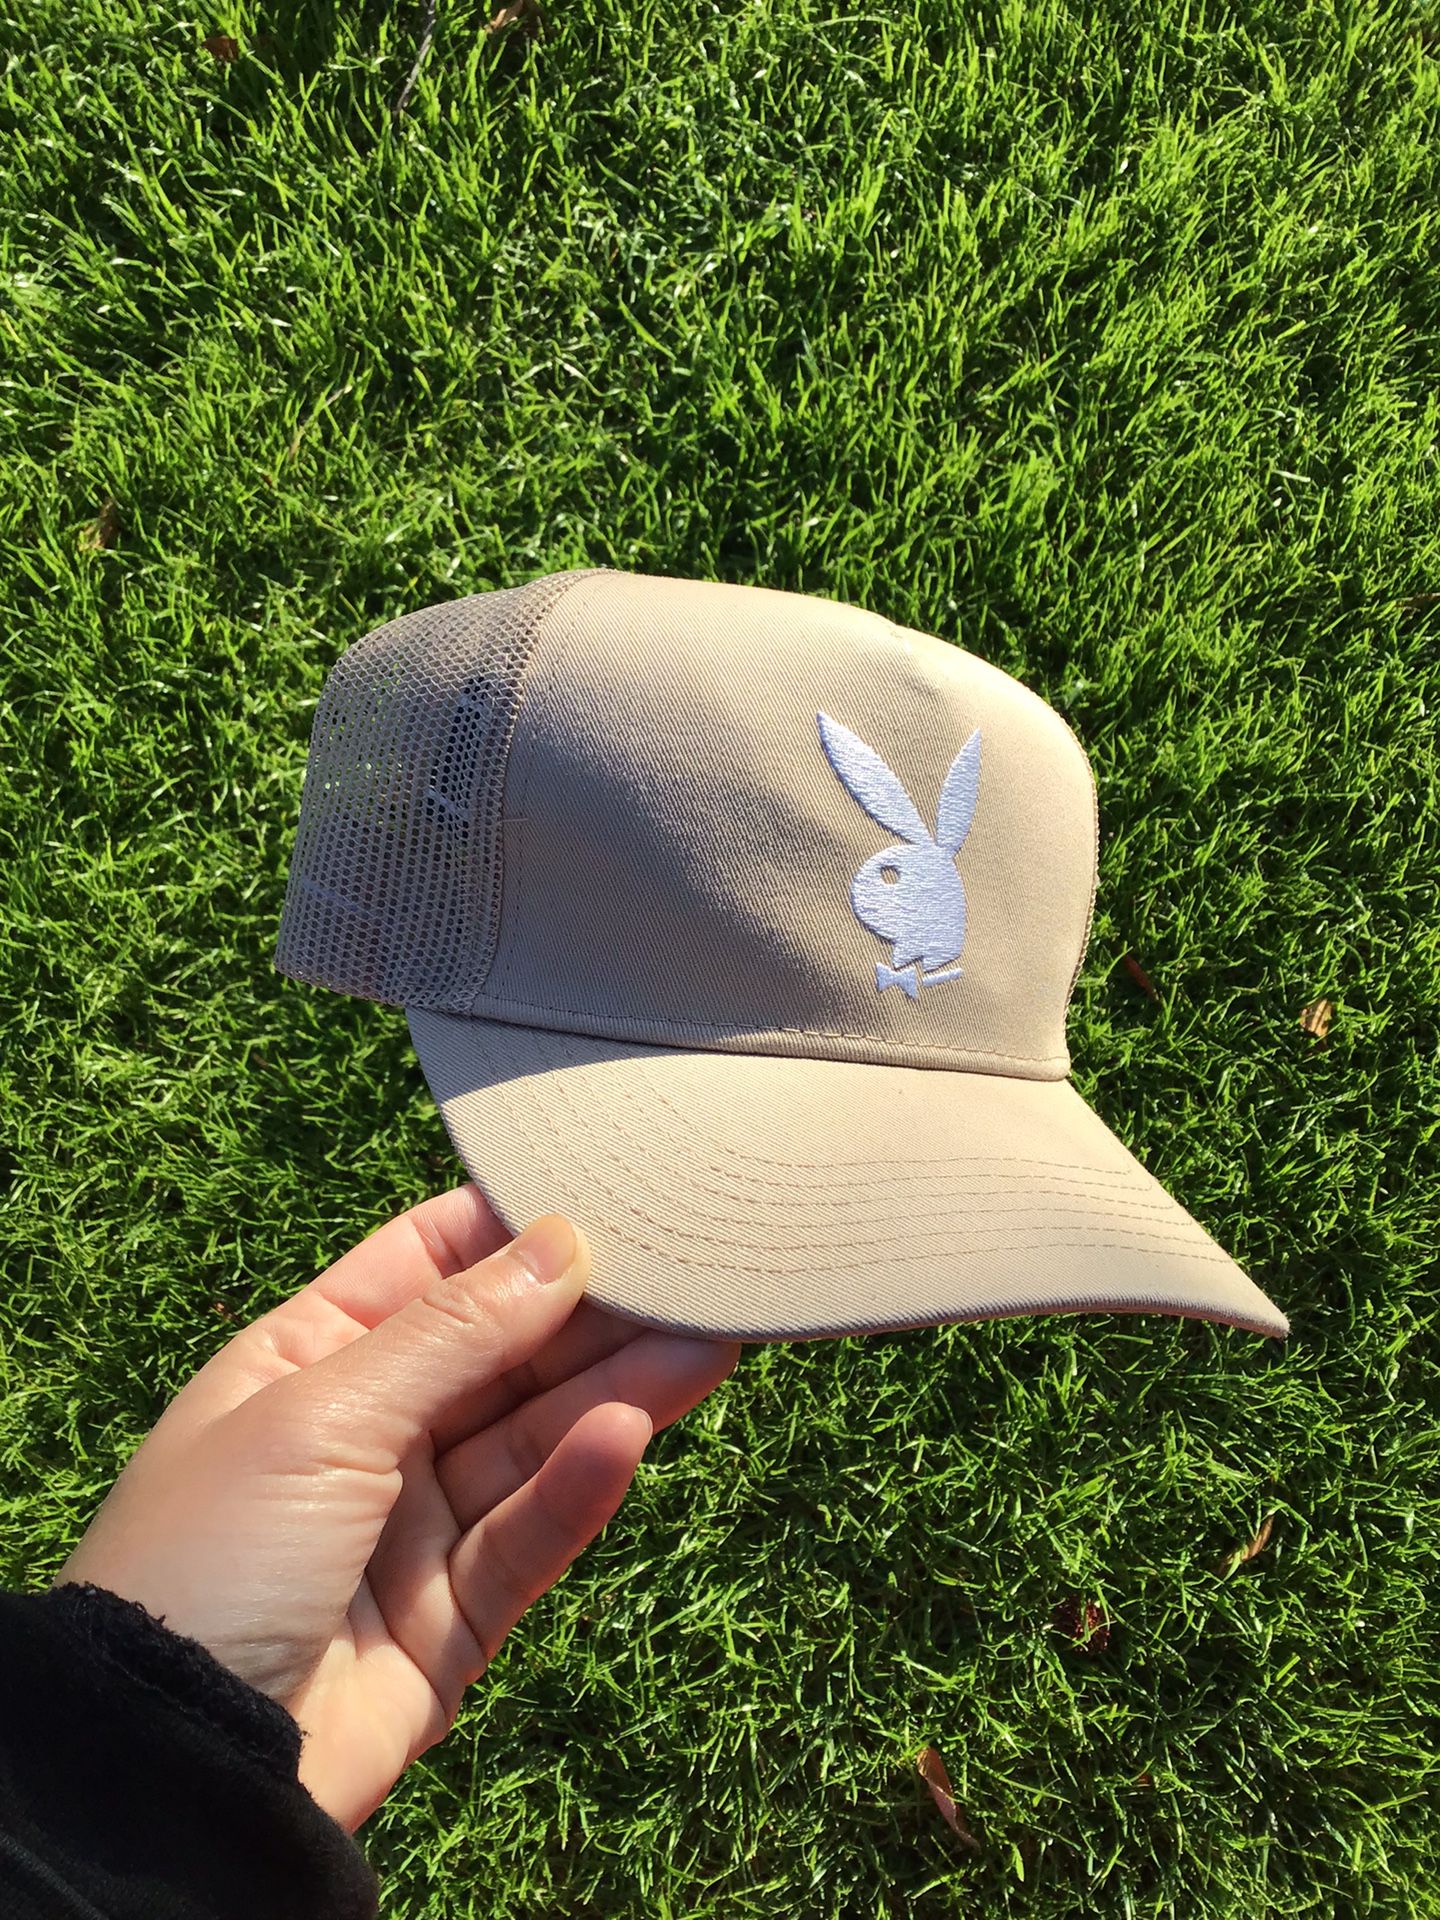 Playboy Bunny Snapback Hat Mens Women Ladies Playboy Embroidered Clothing Beach Hiking Camping Summer Fashion Trucker Hats